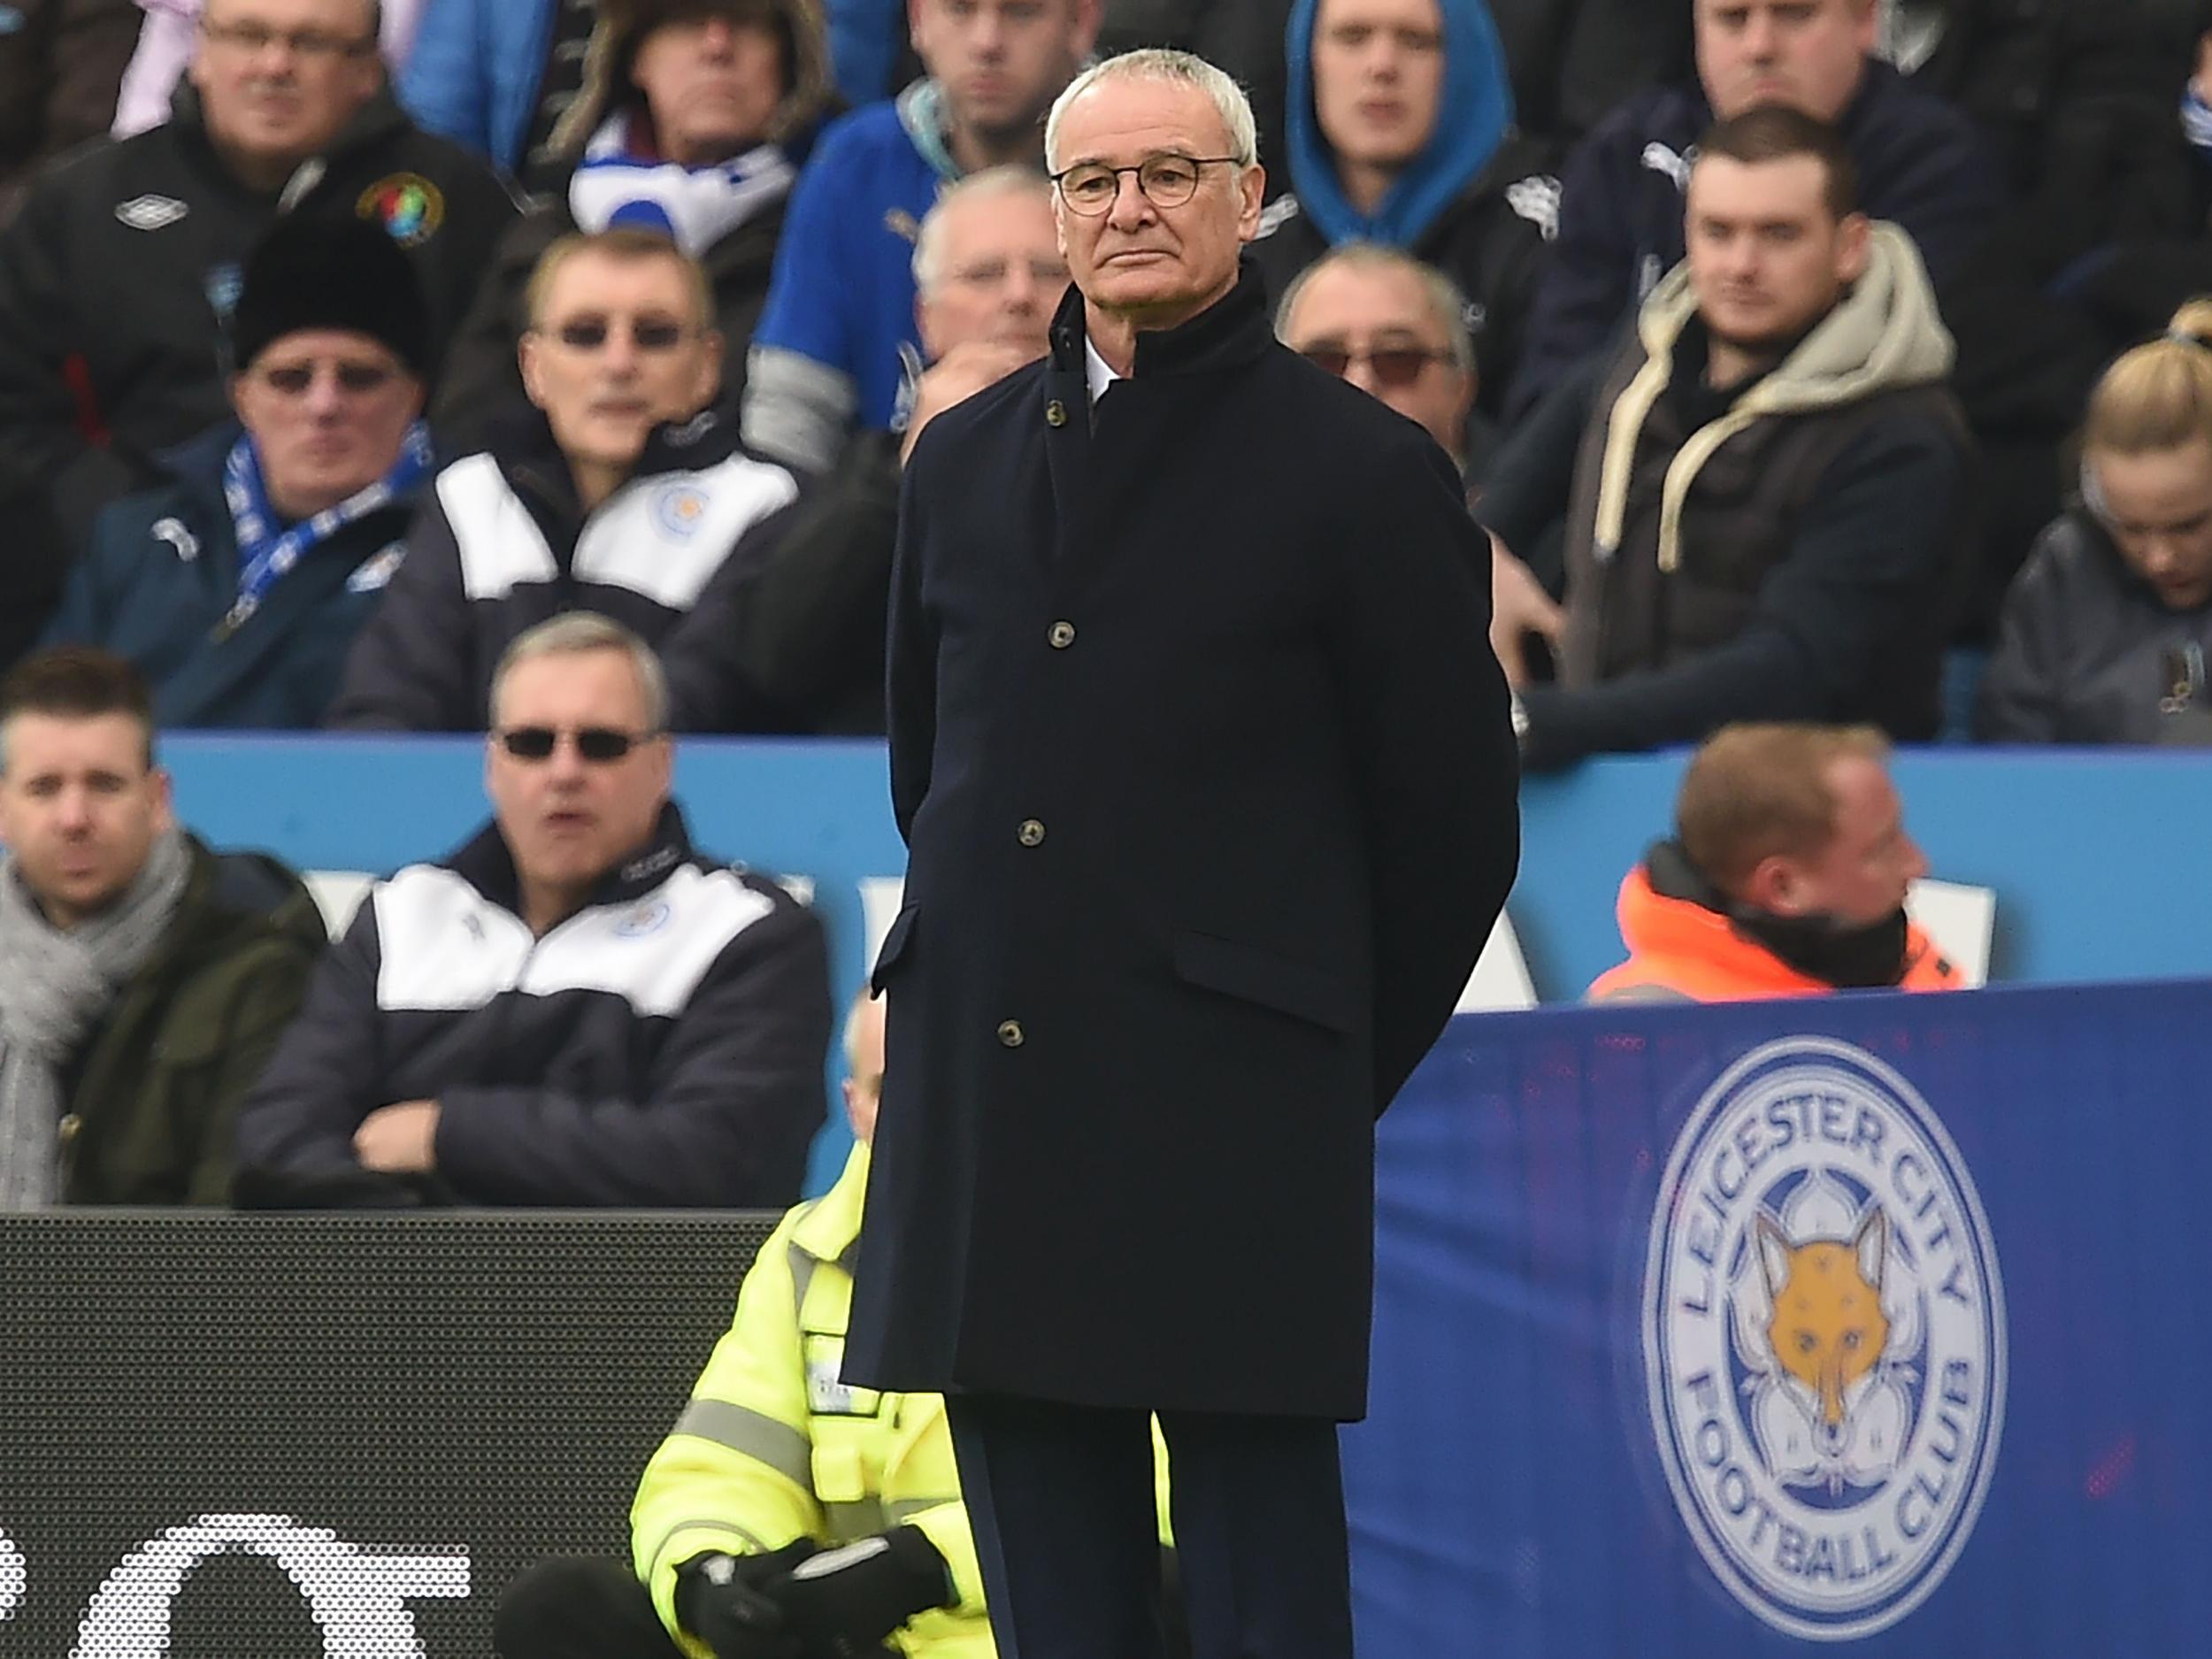 Leicester manager Claudio Ranieri watches on